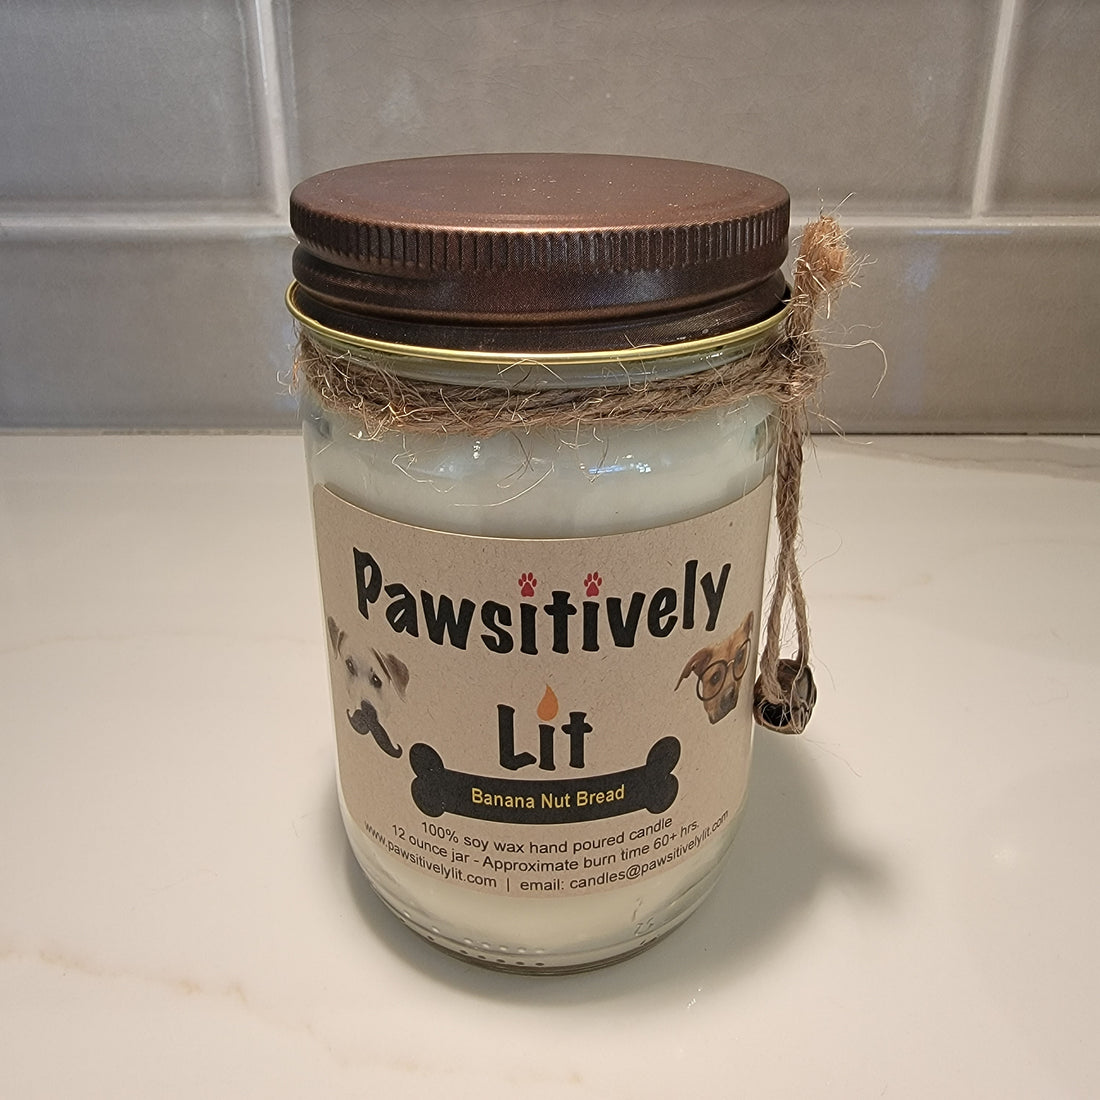 Banana Nut Bread Scented Pawsitively Lit 100% Soy Wax Mason Jar Candle